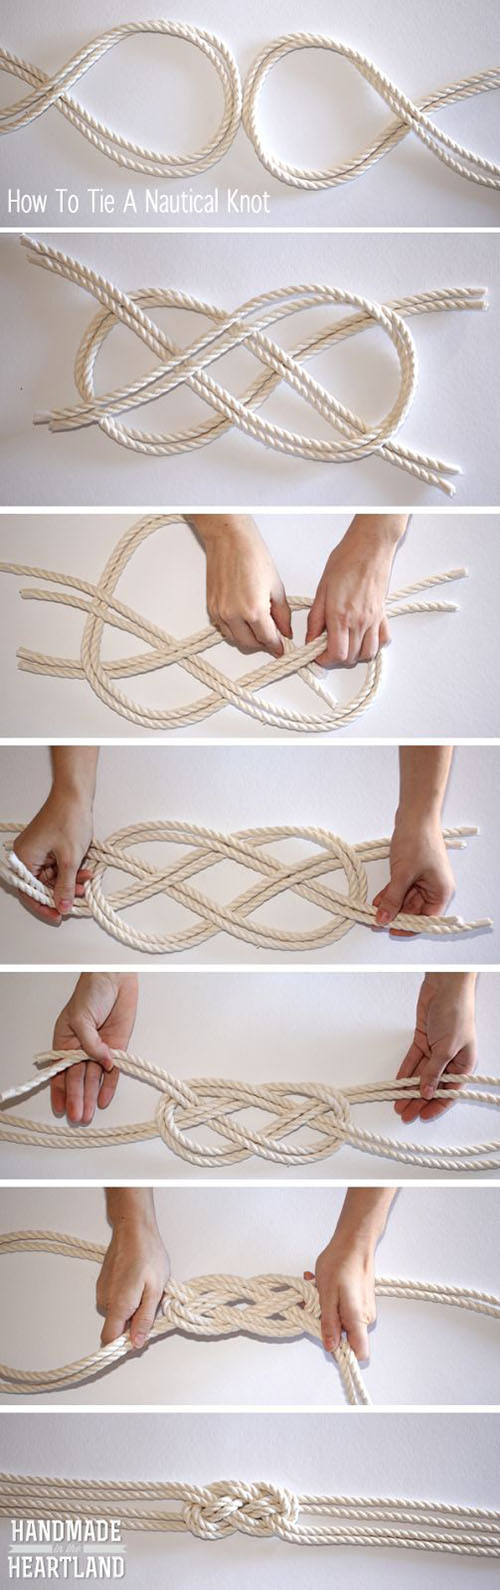 13 DIY Nautical Knot Rope Necklaced95631f6651